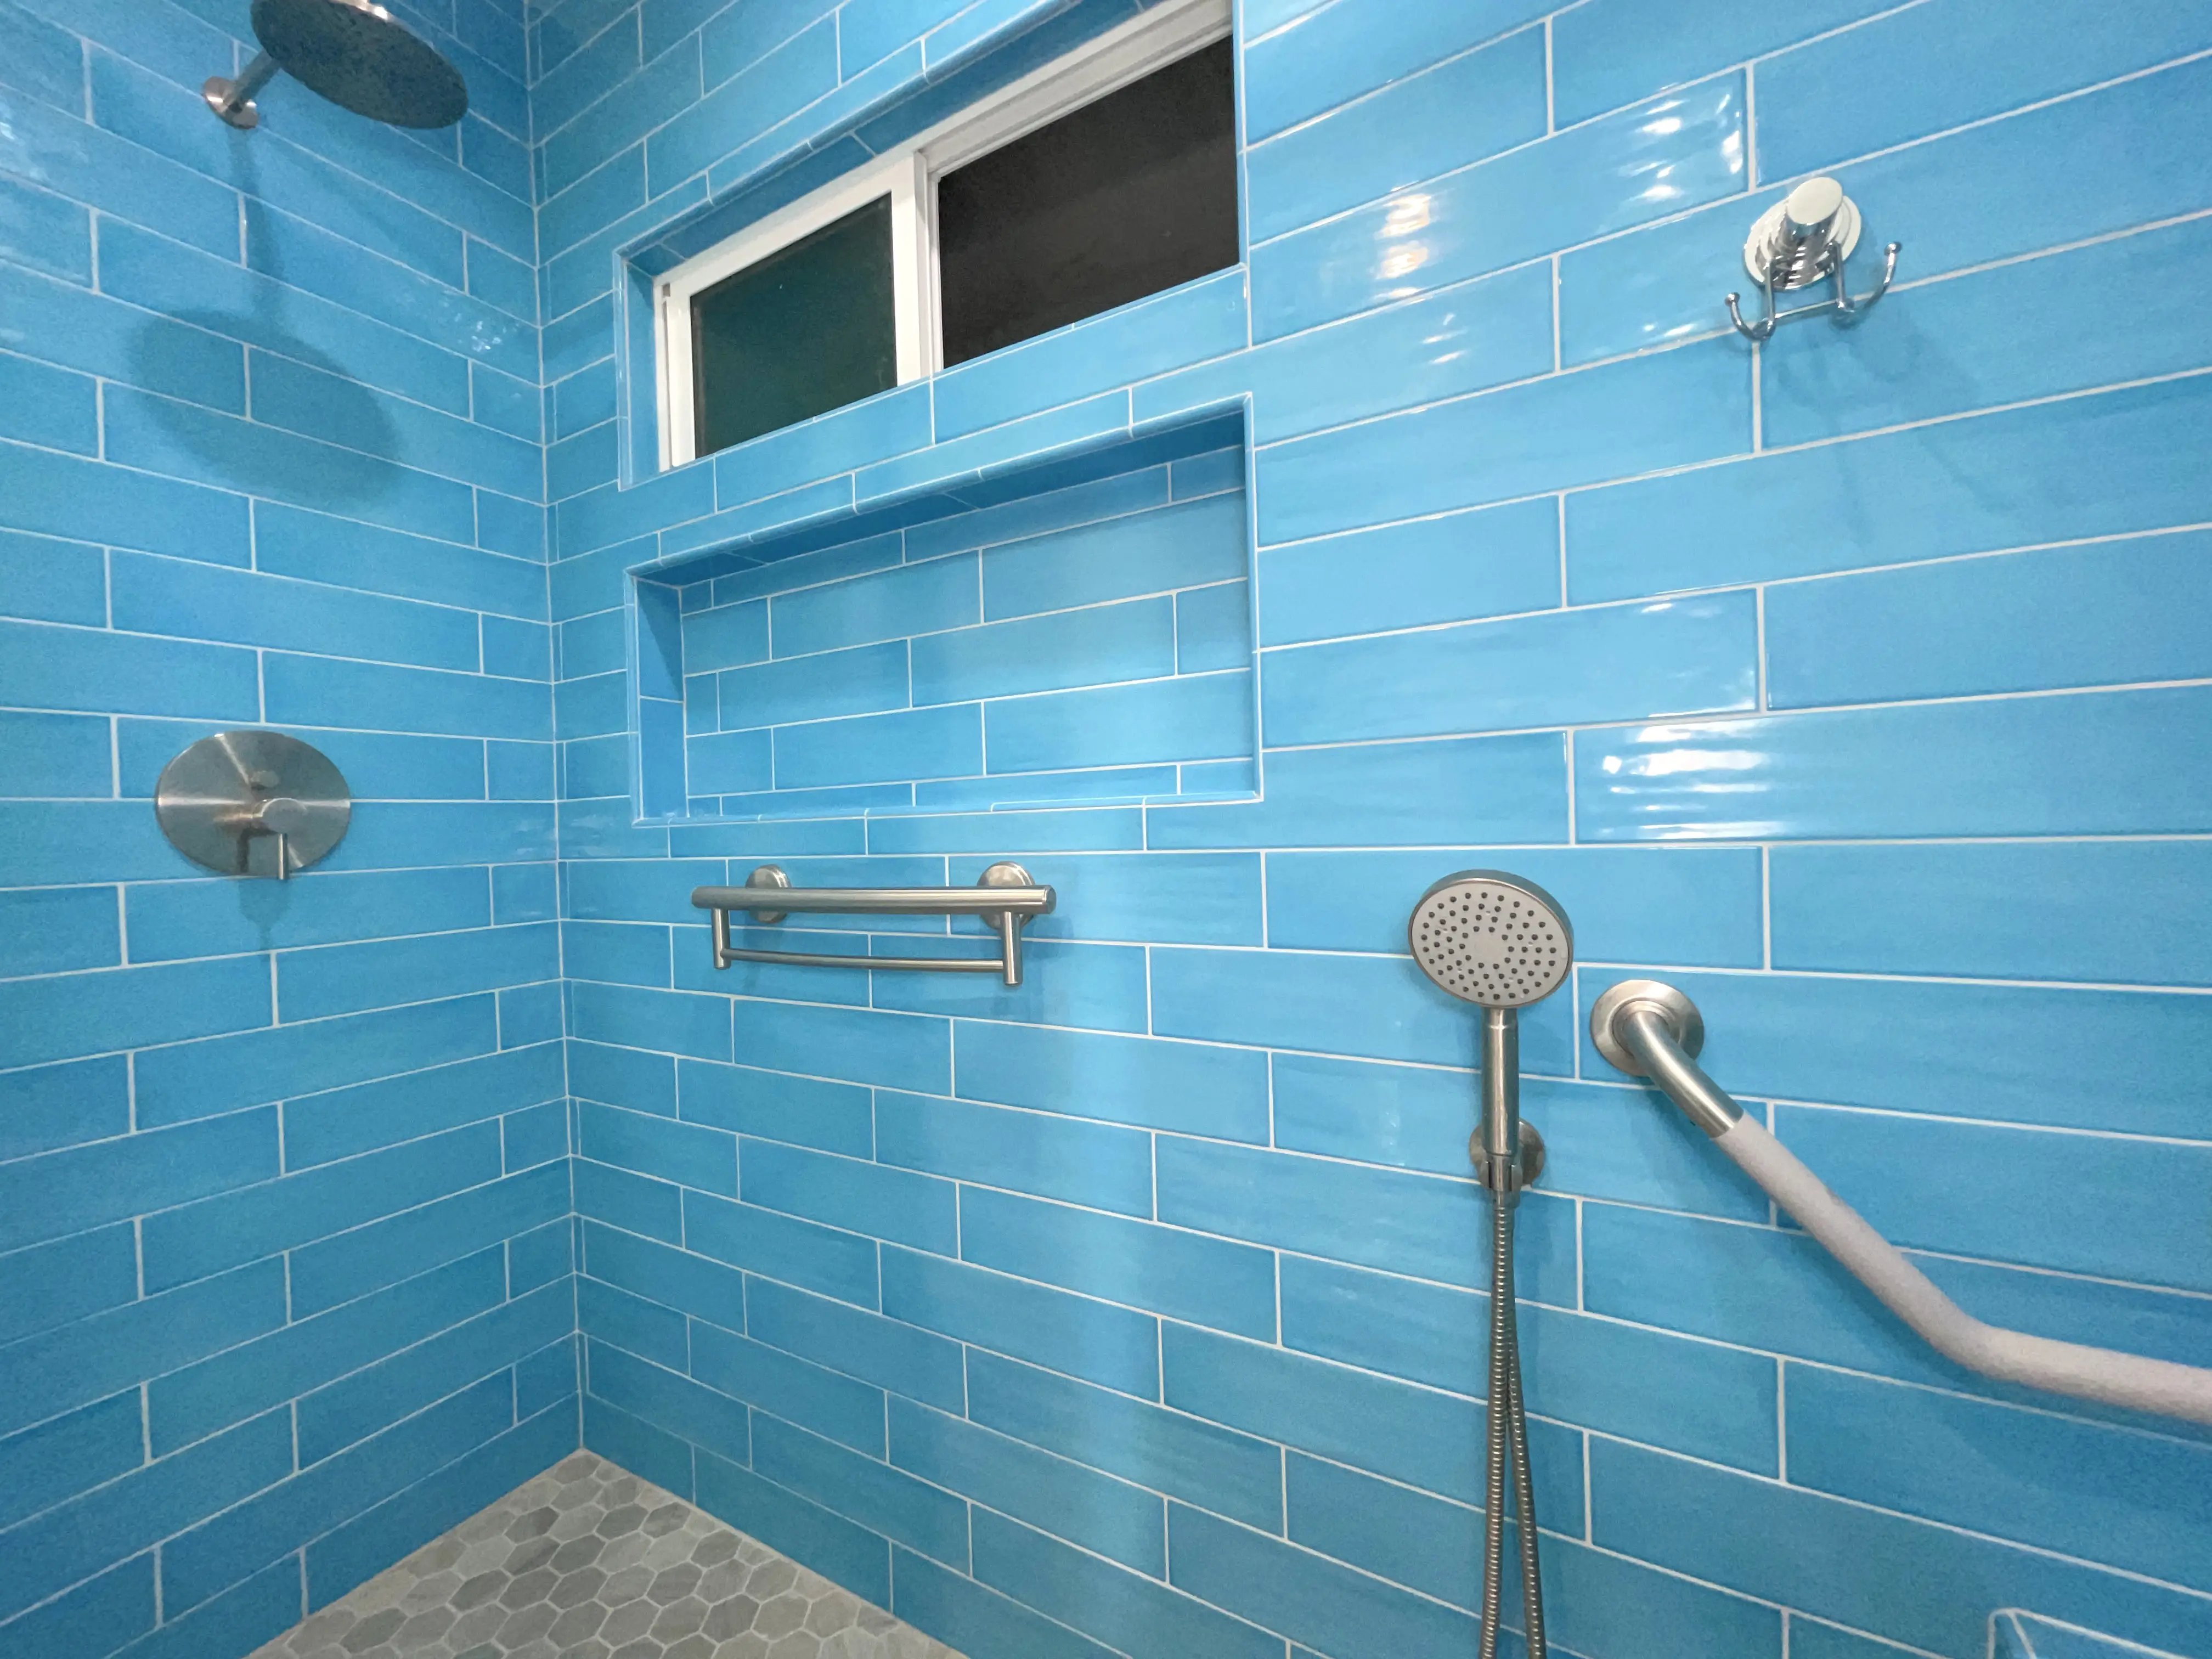 Blue glass tile was installed floor to ceiling in the shower for the primary bathroom.